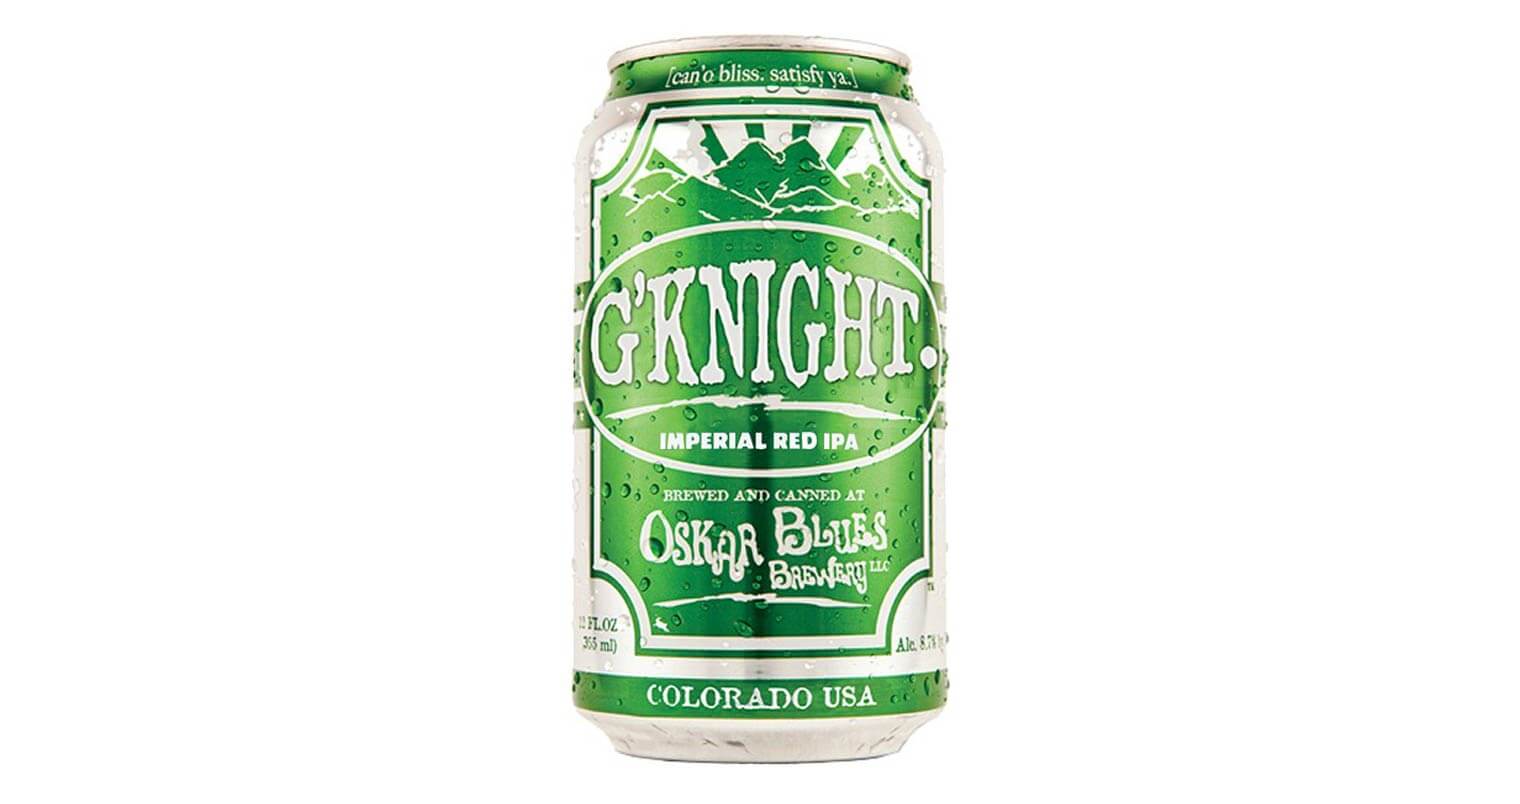 G'Knight Imperial Red IPA, featured image, can on white